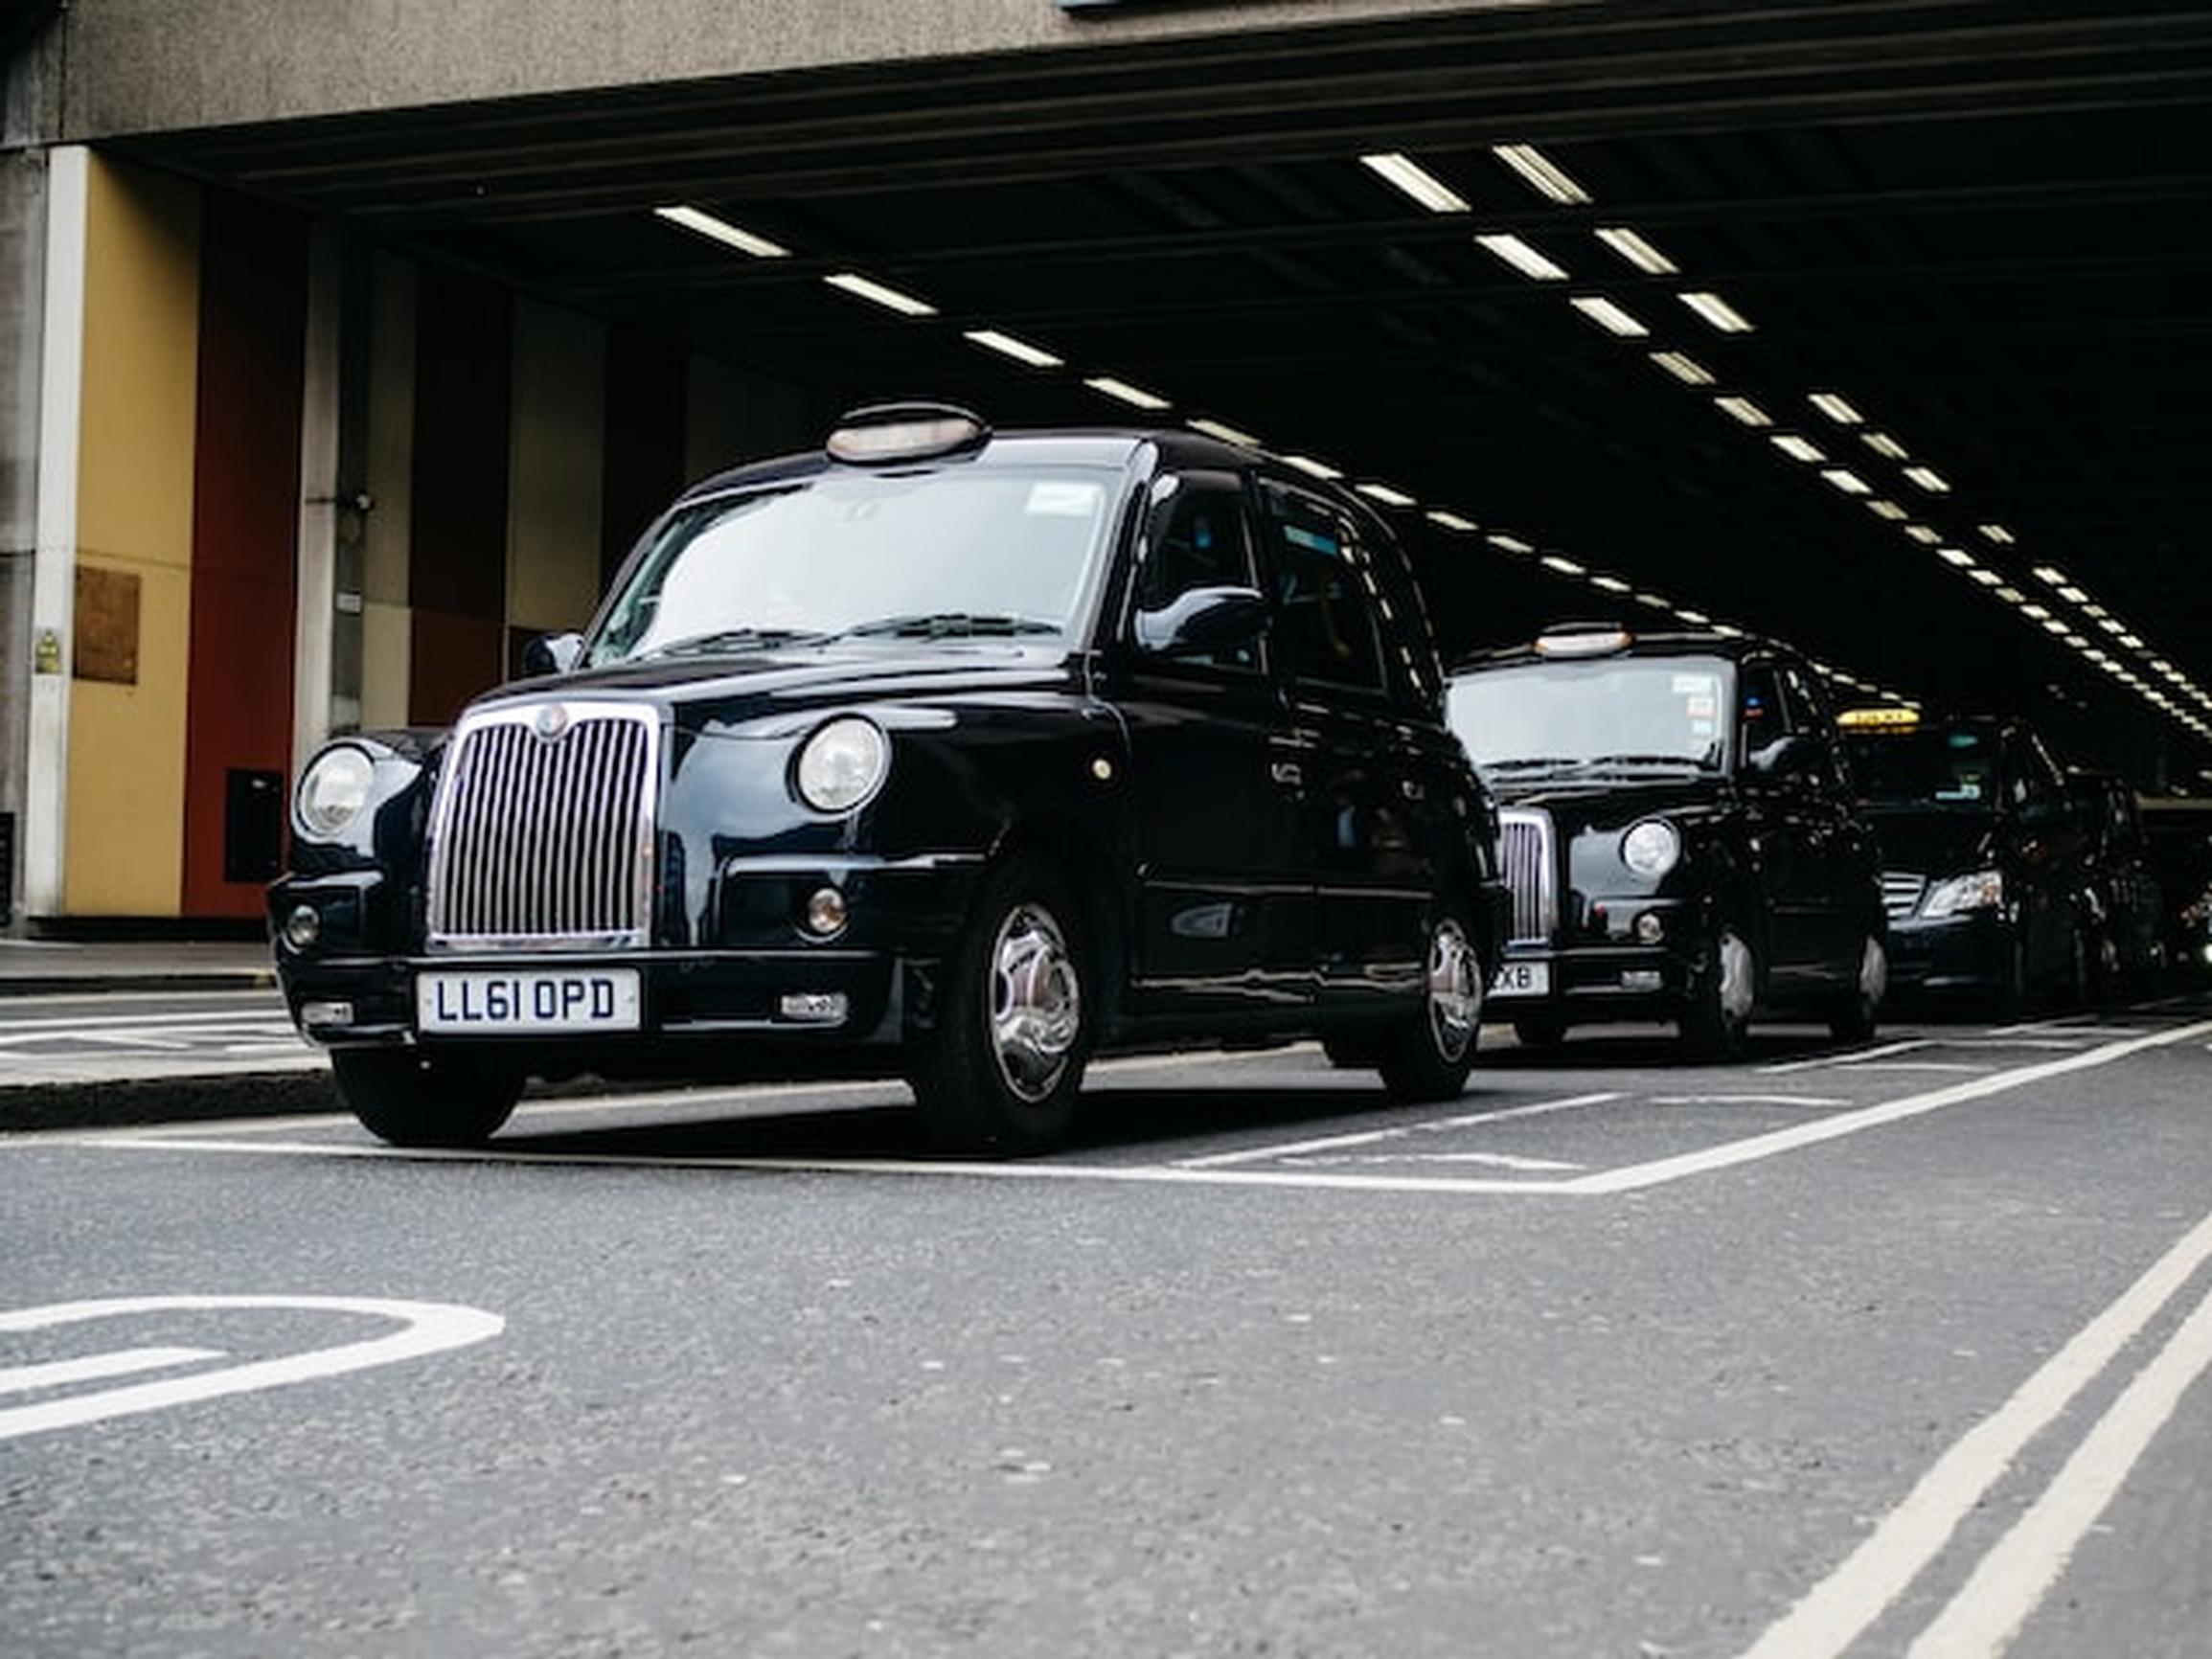 TfL`s emission standard has already been seen the deployment more than 6,000 black cabs capable of not producing any emissions at their exhausts (Charles Etoroma/Unsplash)